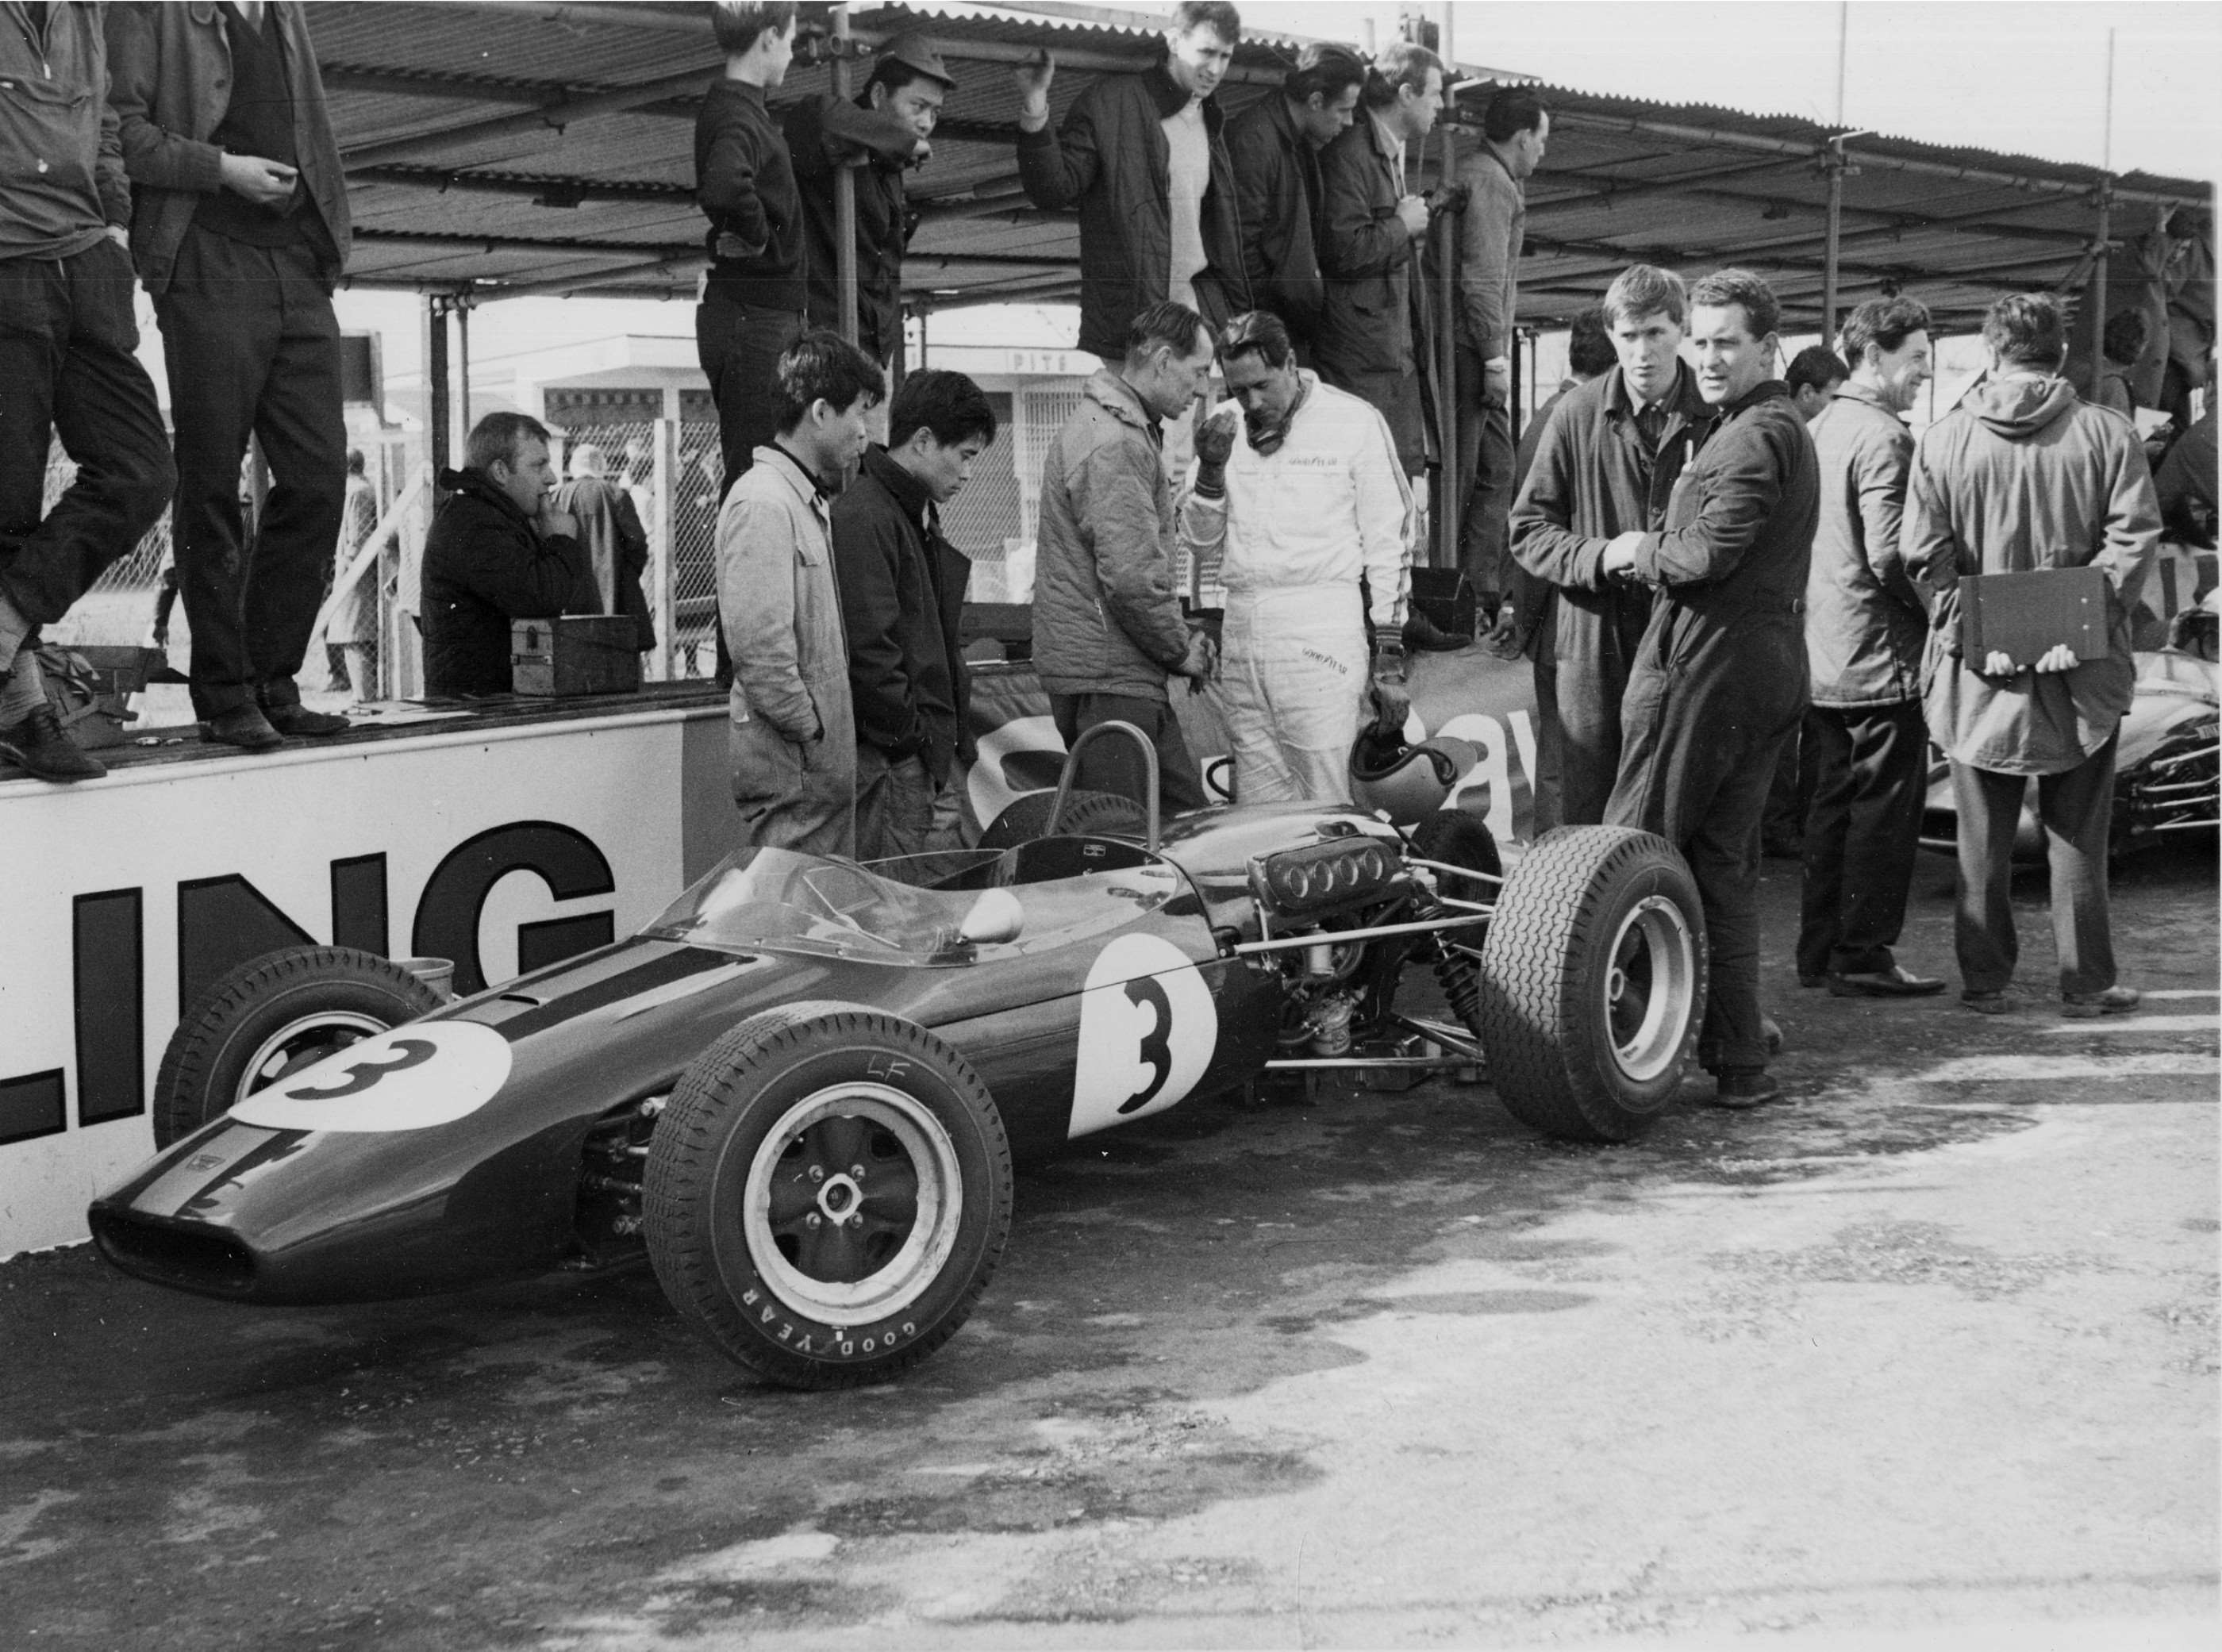 Formula 2 finale - Jack Brabham and his Brabham car designer/business partner Ron Tauranac with the BT18-Honda, Easter Monday 1966. Team mechanic Nobuhiko Kawamoto would return to Goodwood in later years - as popular and highly-successful company CEO!